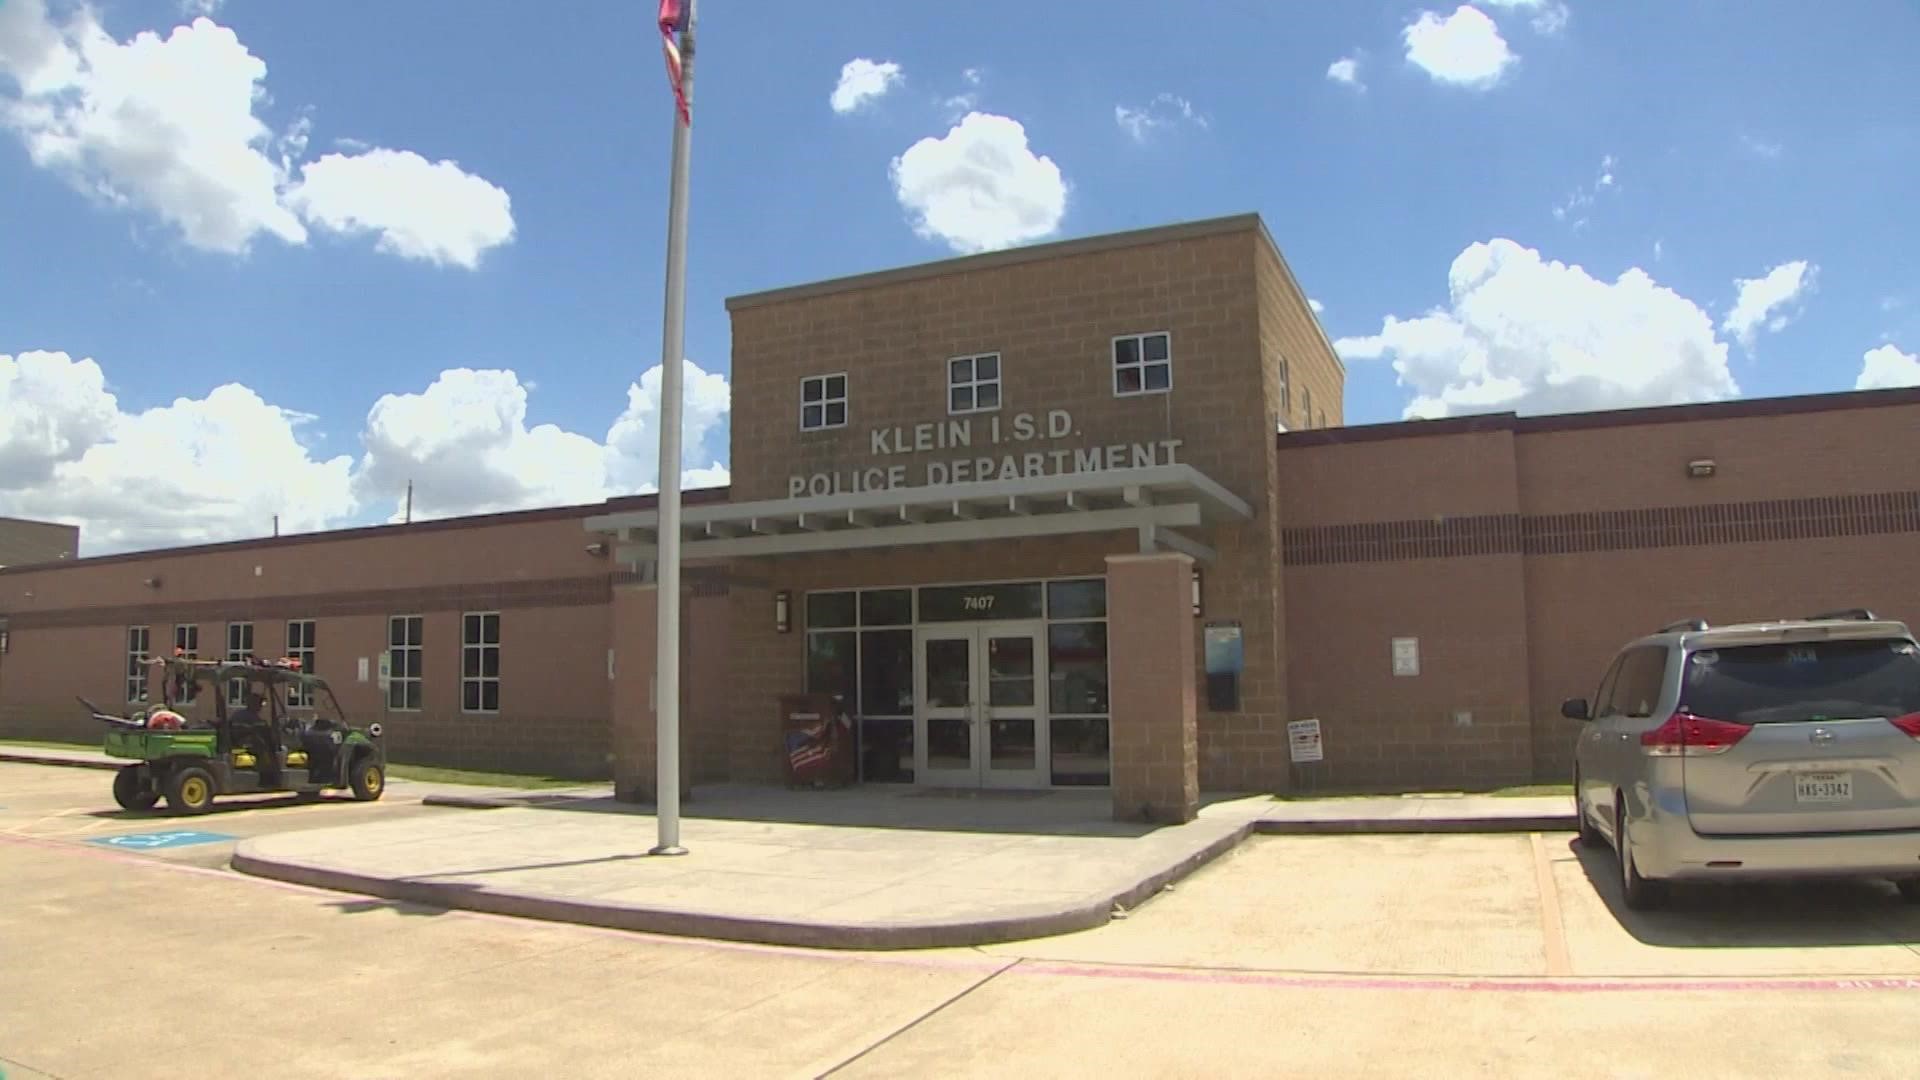 District officials say they've taken several measures to keep students safe this school year, including upgrading locks and cameras and improving perimeter fencing.